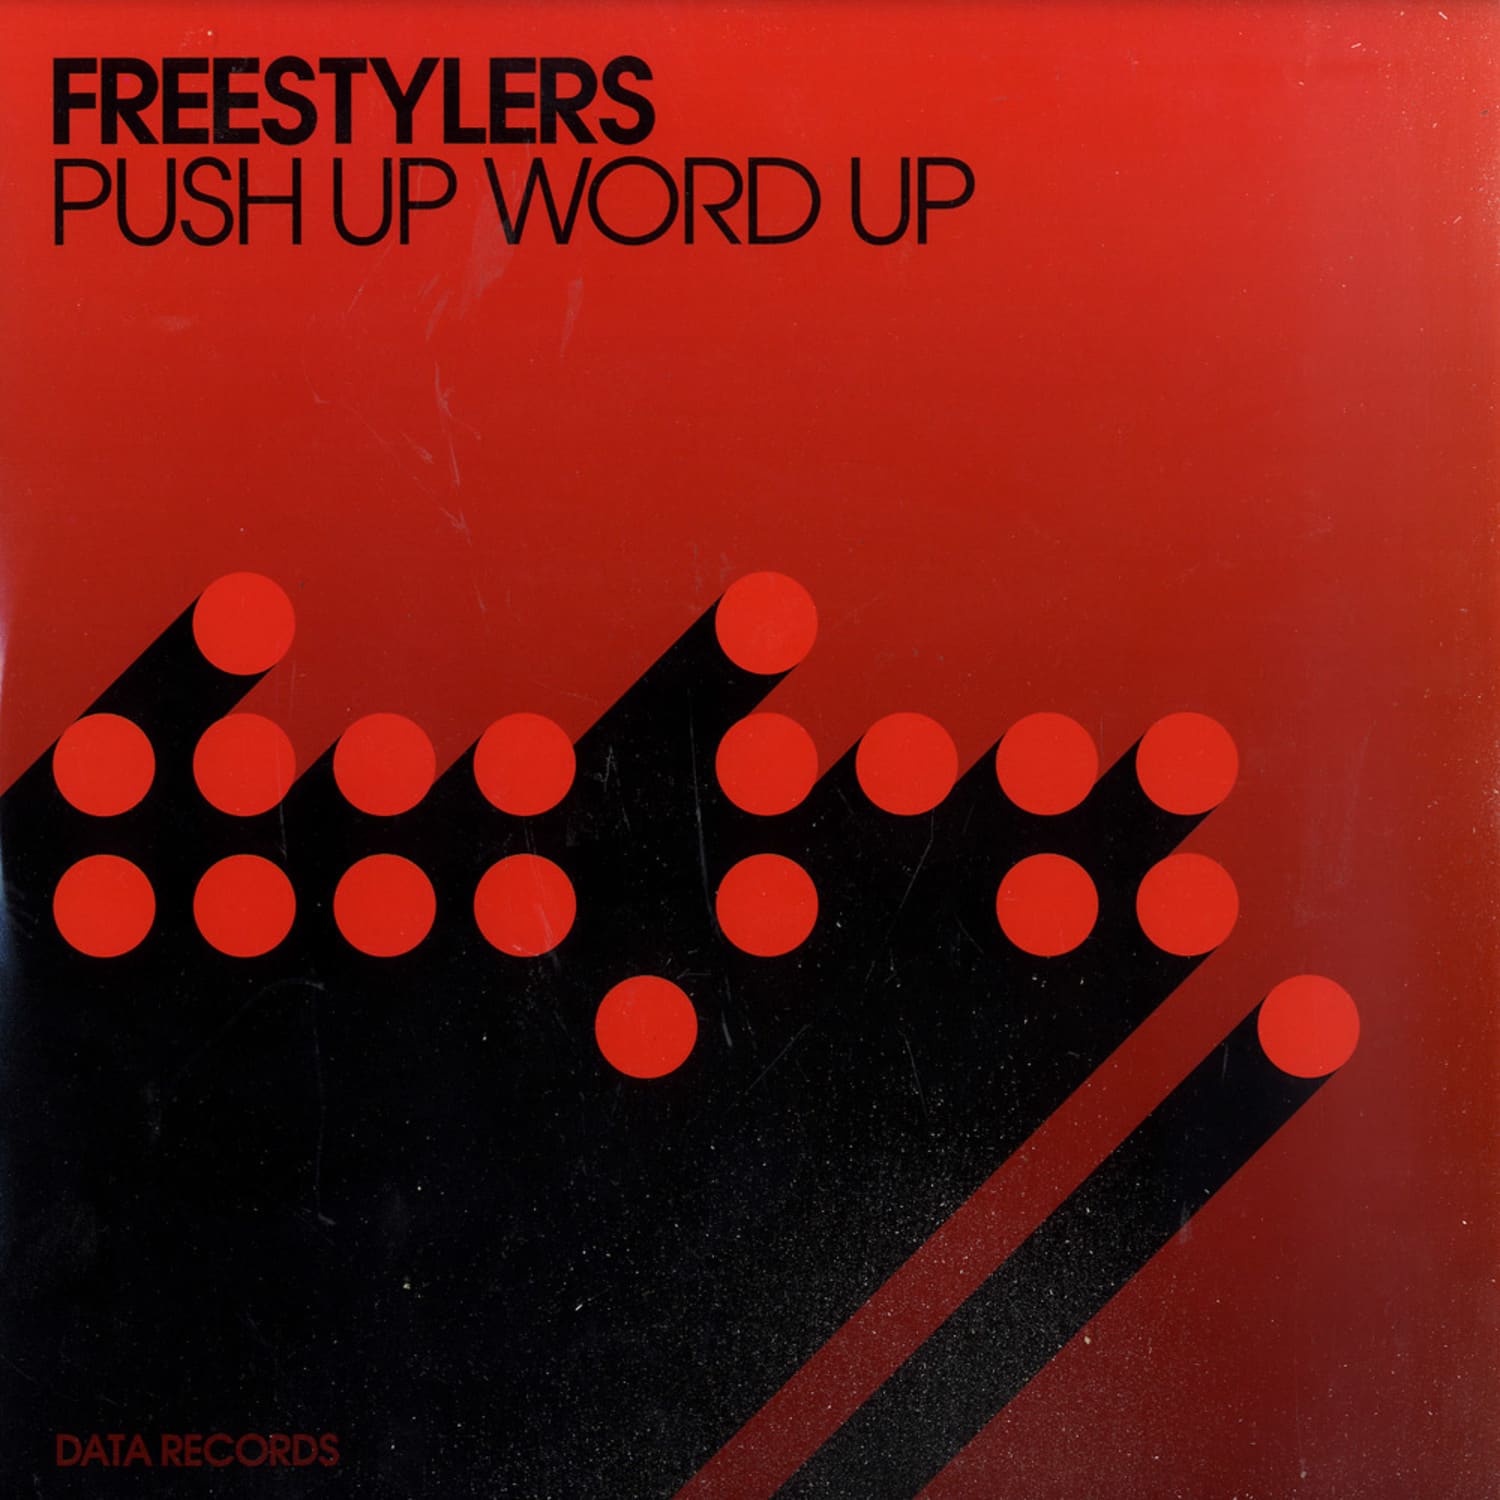 Freestylers - PUSH UP WORD UP